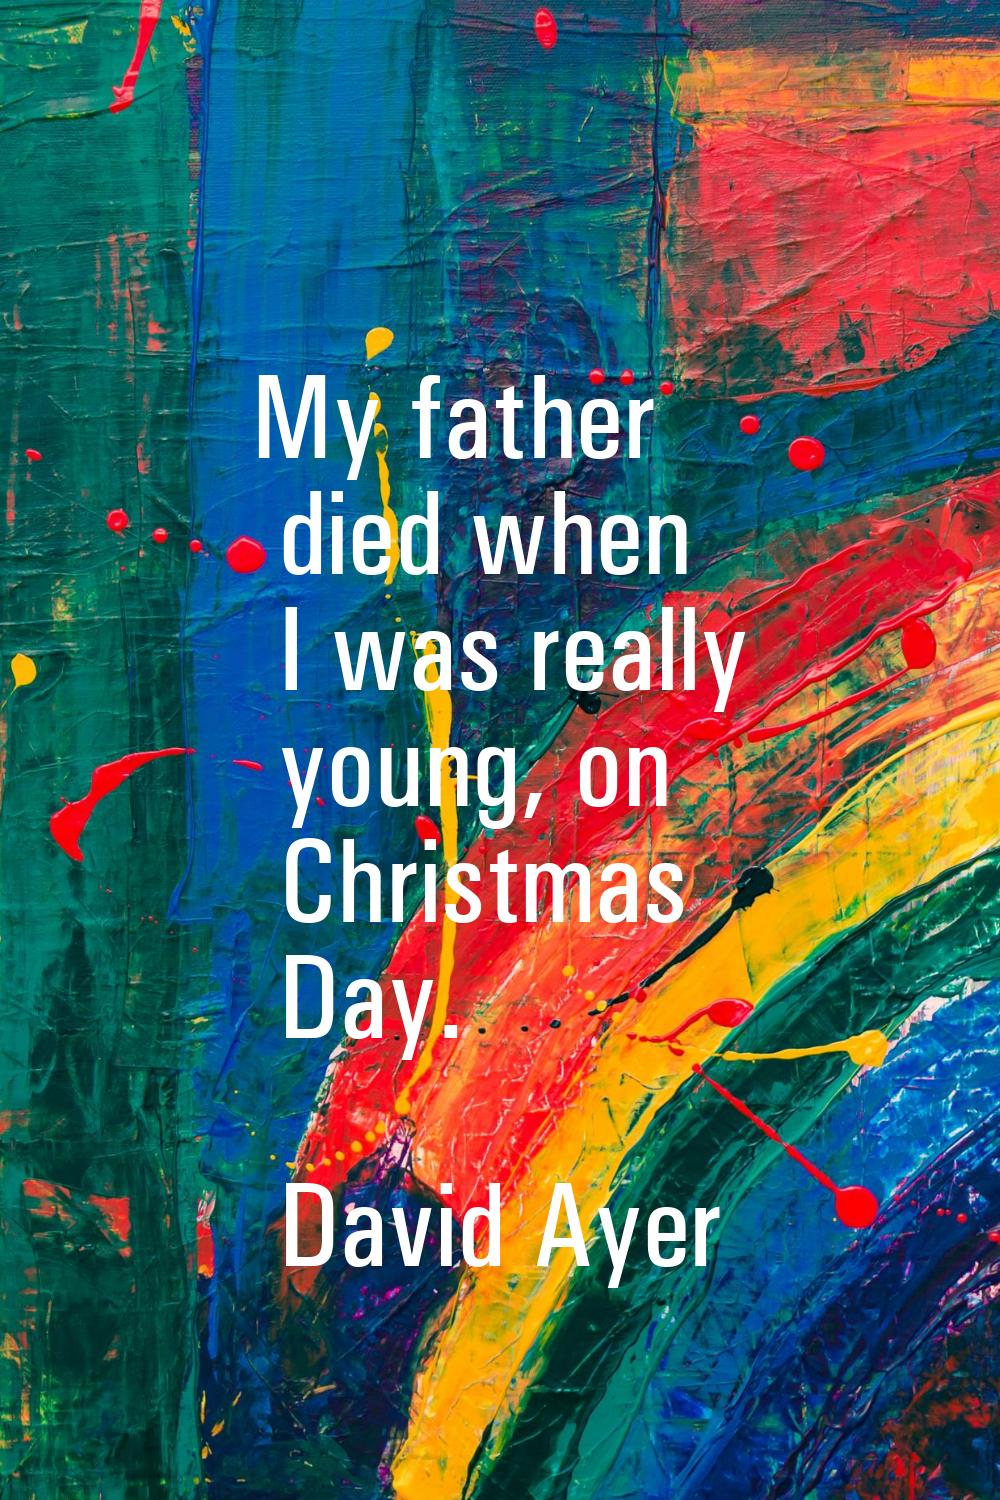 My father died when I was really young, on Christmas Day.